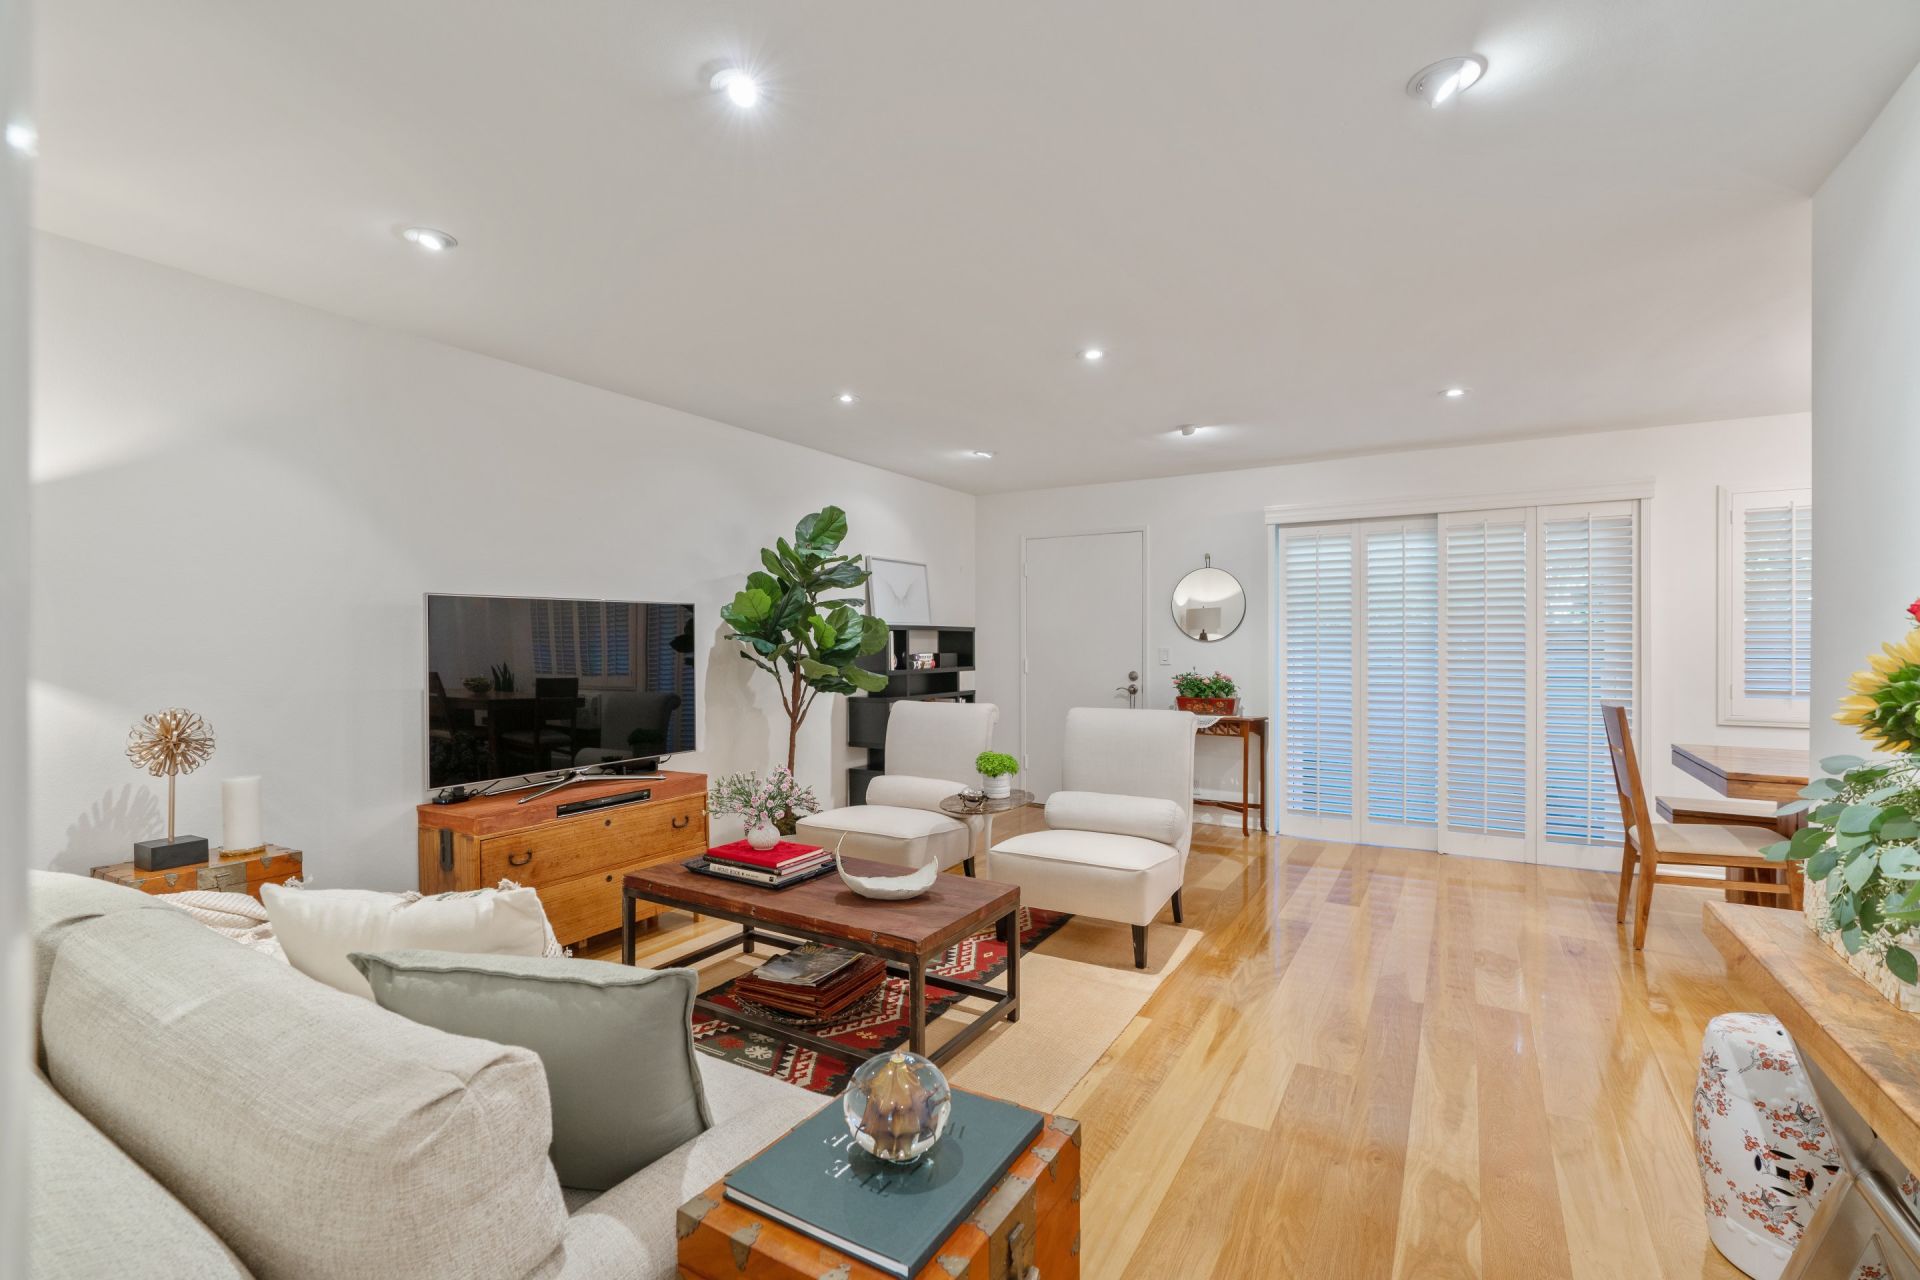 JUST LISTED | 1 Bed + 1 Bath Contemporary Condo in Prime West LA/Palms